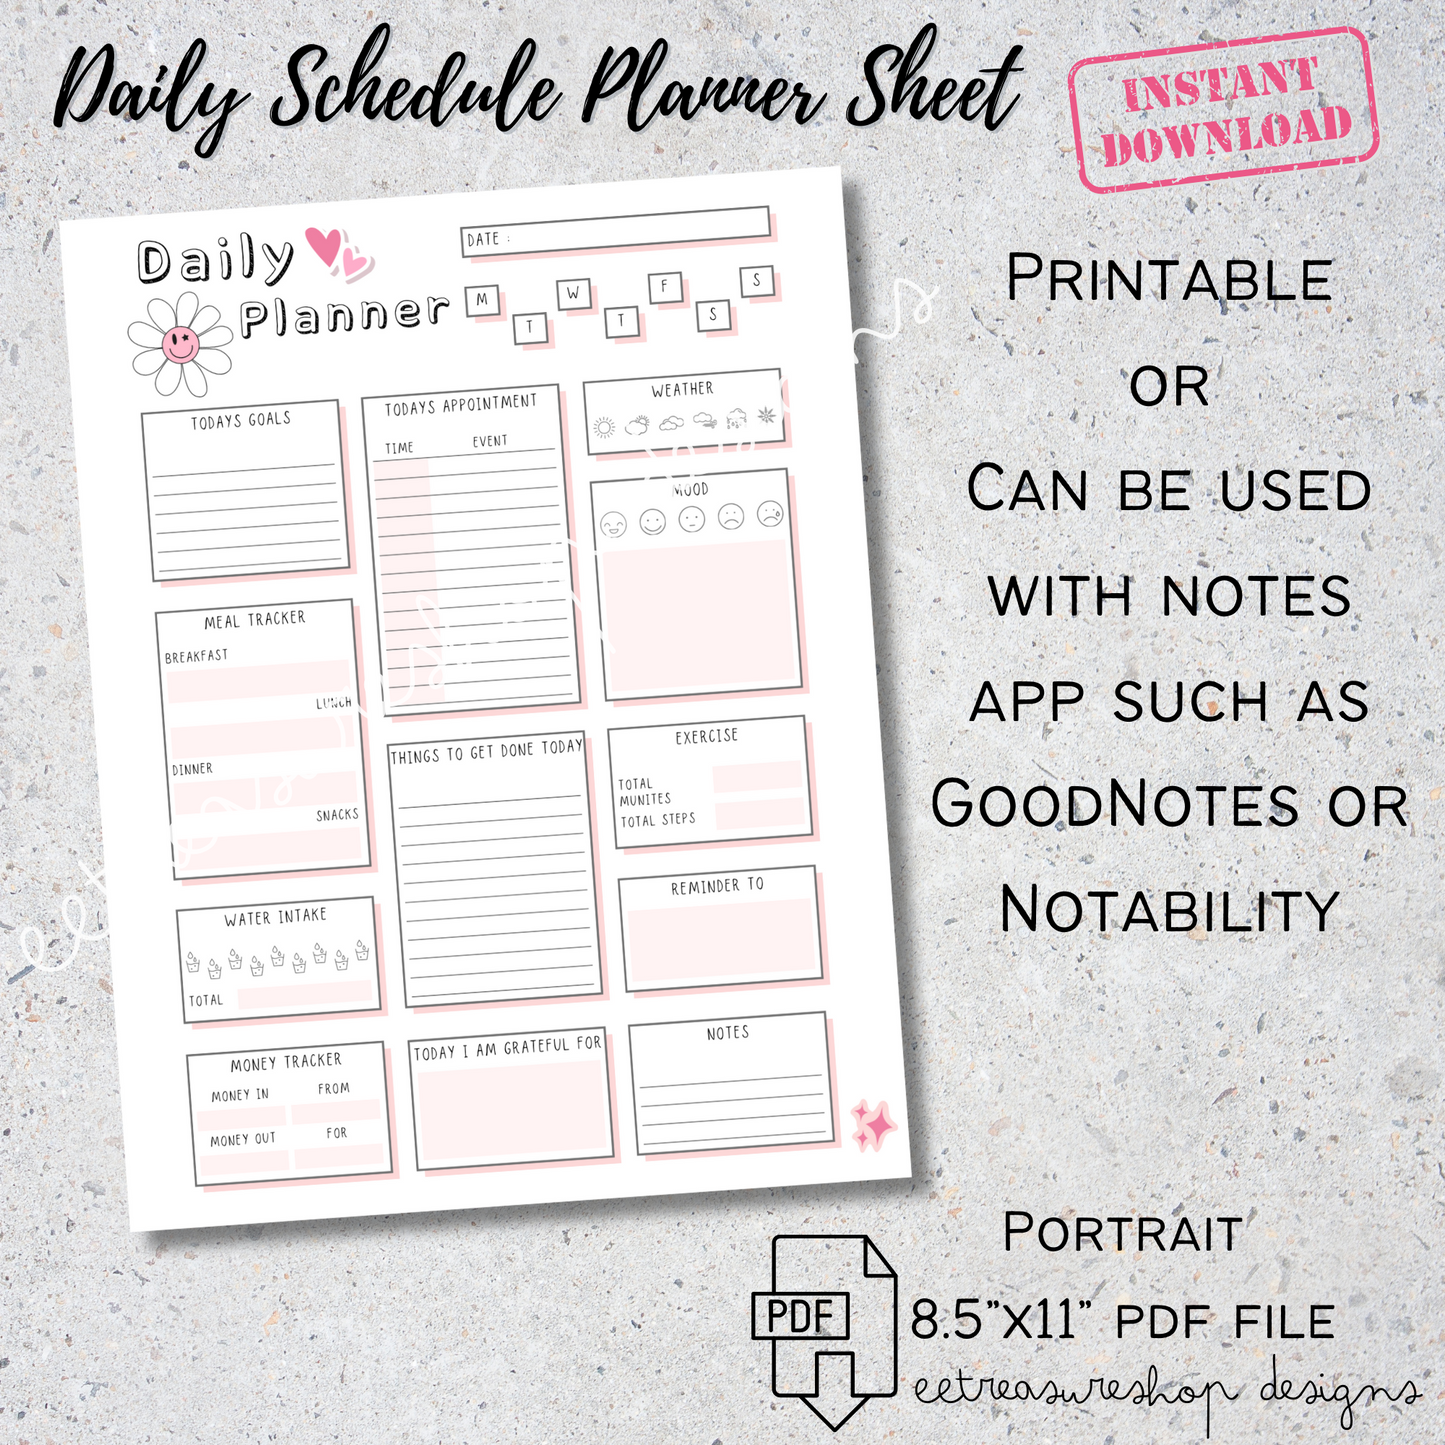 Daily Schedule Planner Printable PDF, Planner Digital Download, GoodNotes Planner, iPad Planner